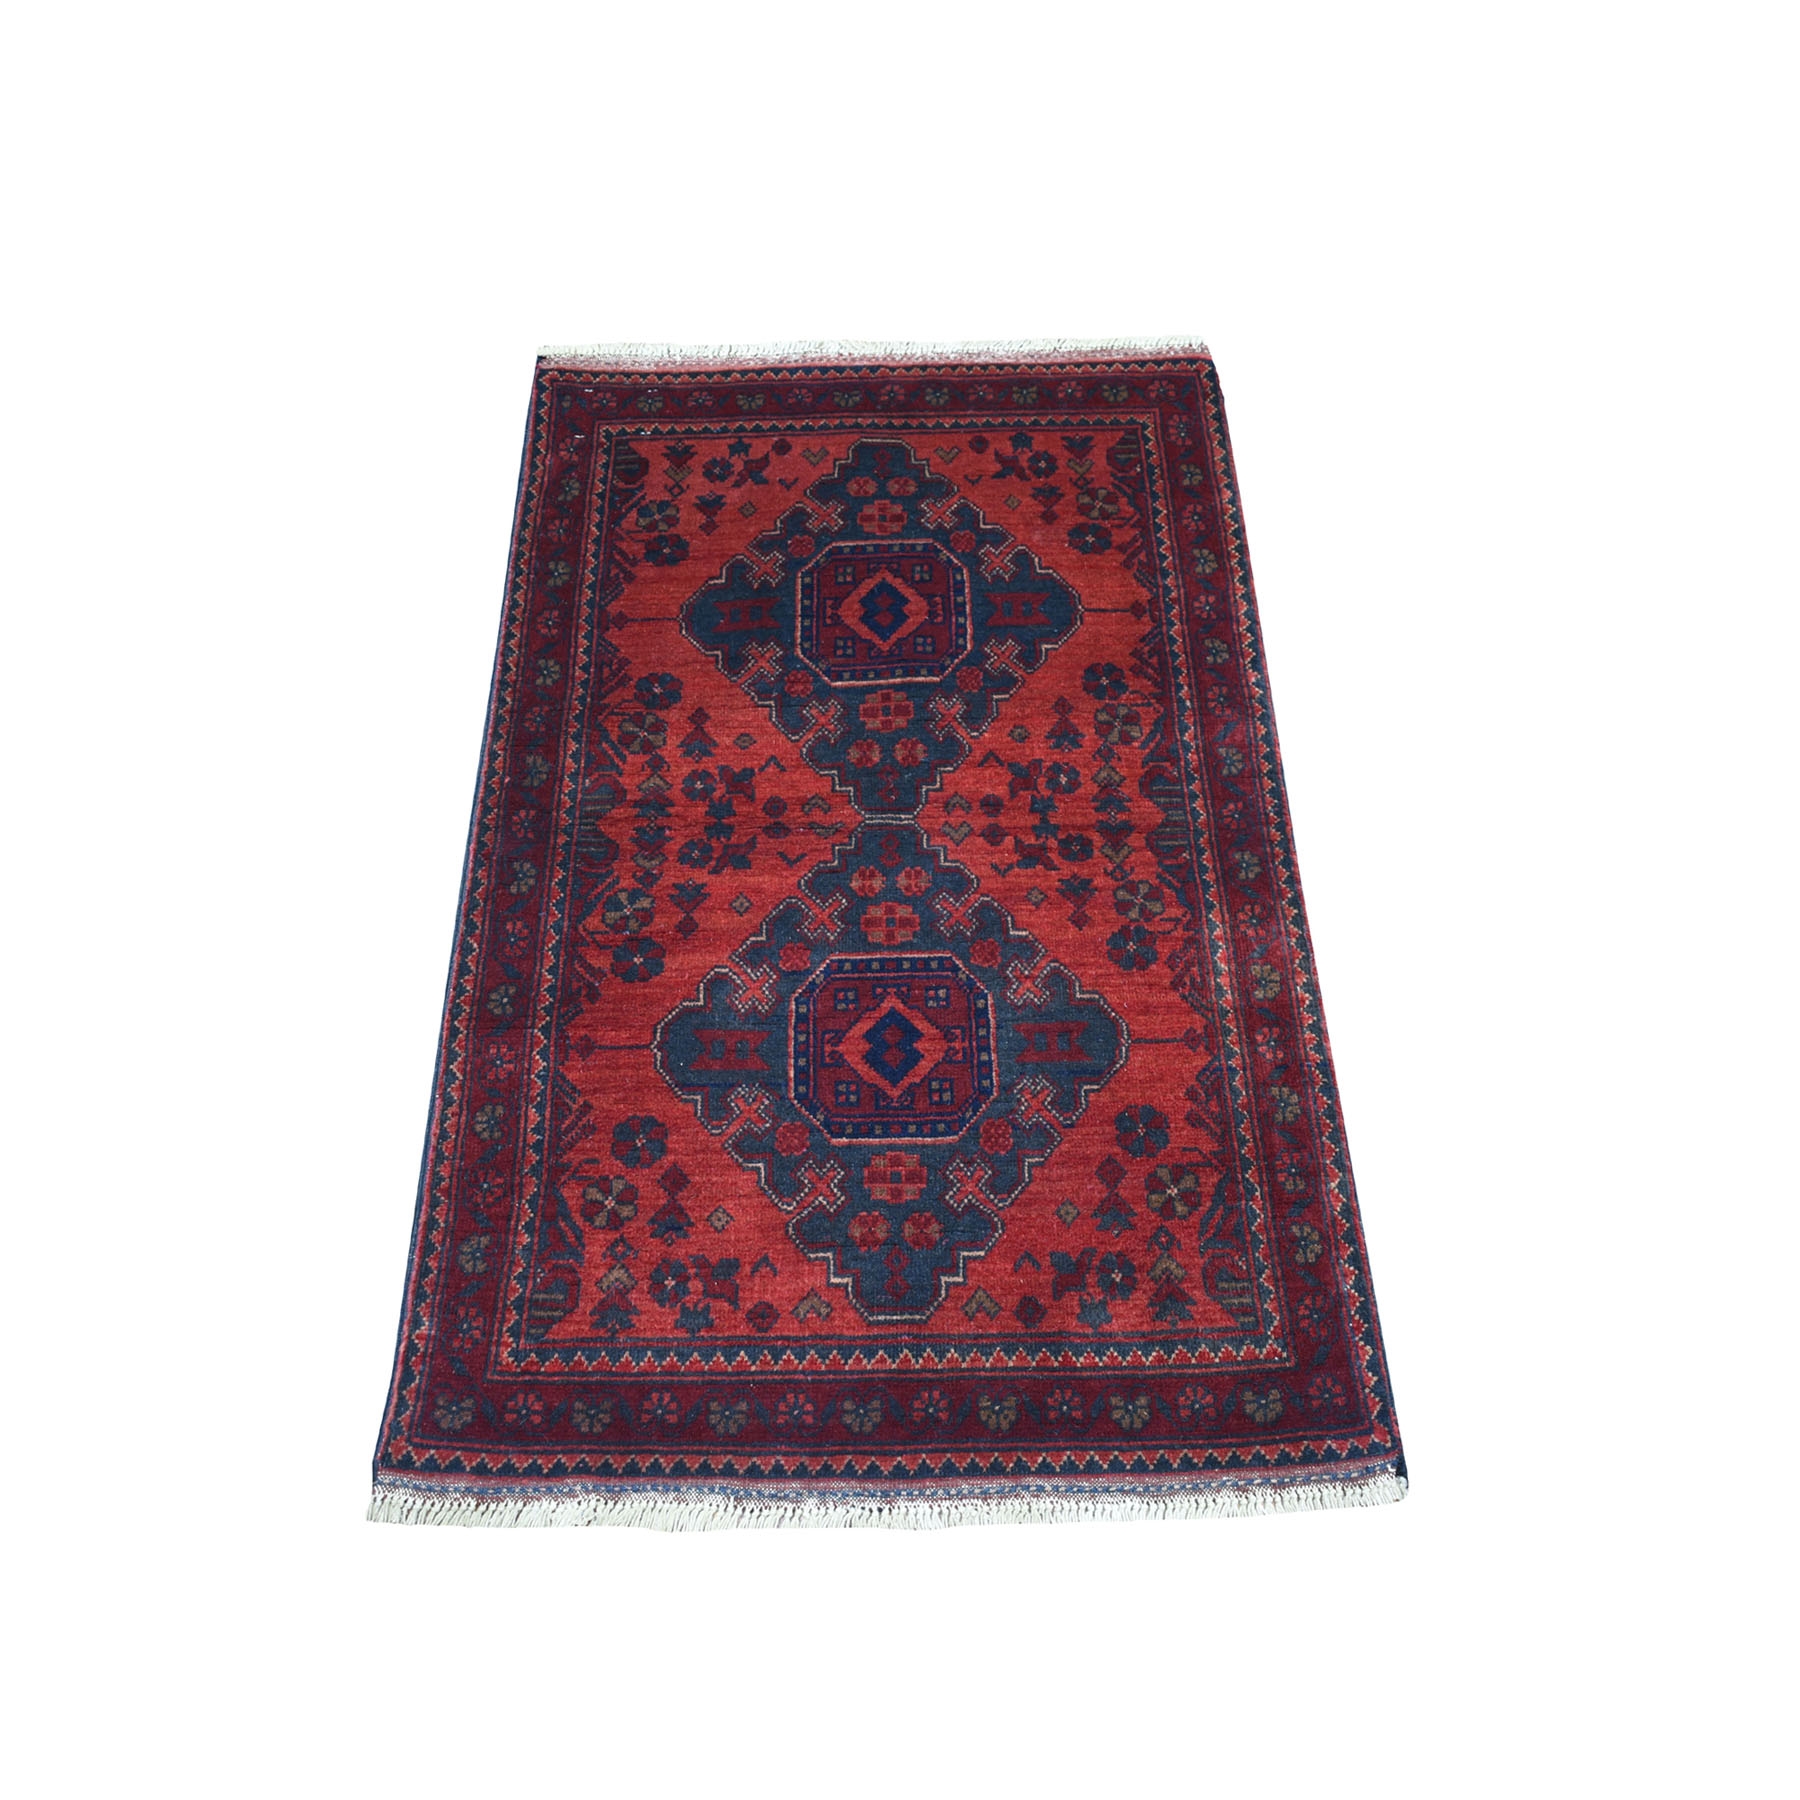 2'5"X4' Deep And Saturated Red Geometric Afghan Andkhoy Pure Wool Hand Knotted Oriental Rug moaec7a8